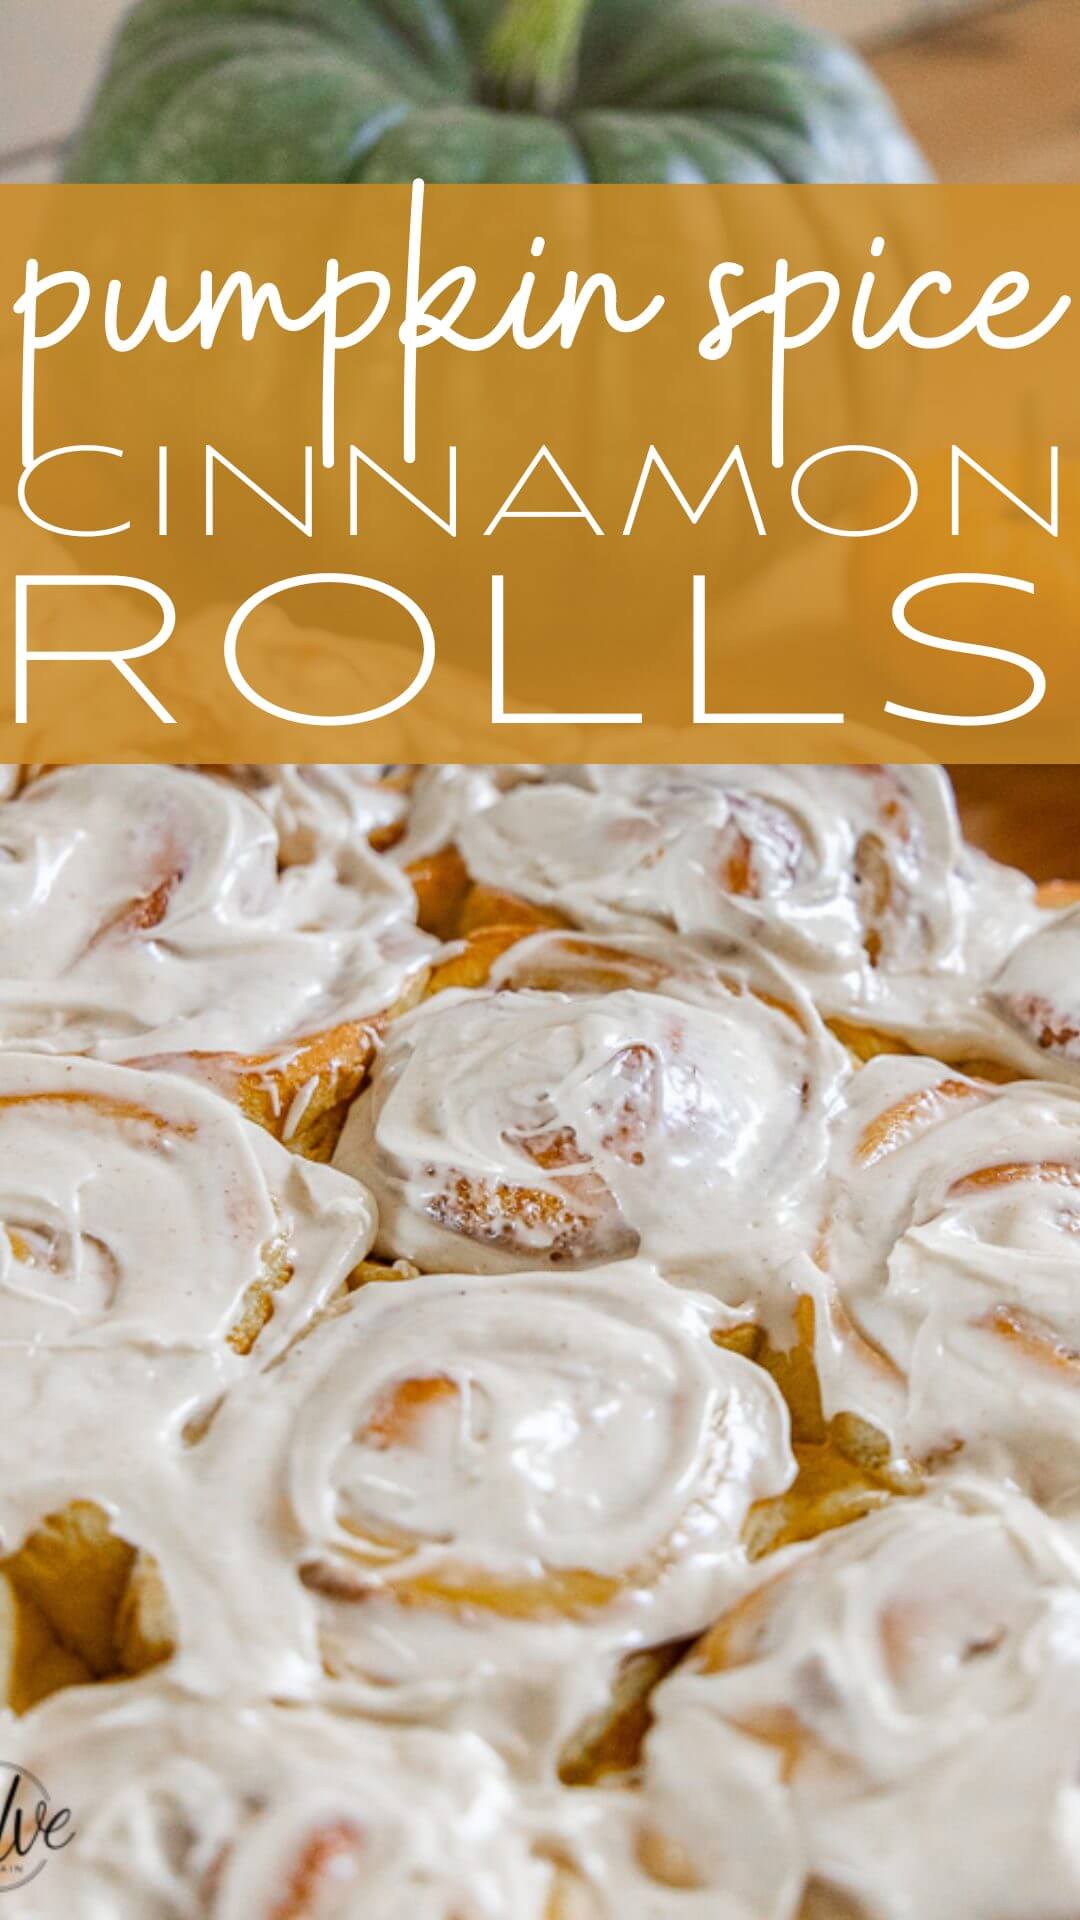 If you like pumpkin recipes, you will definitely need to make the best cinnamon rolls this fall. They are light, fluffy and flavorful!